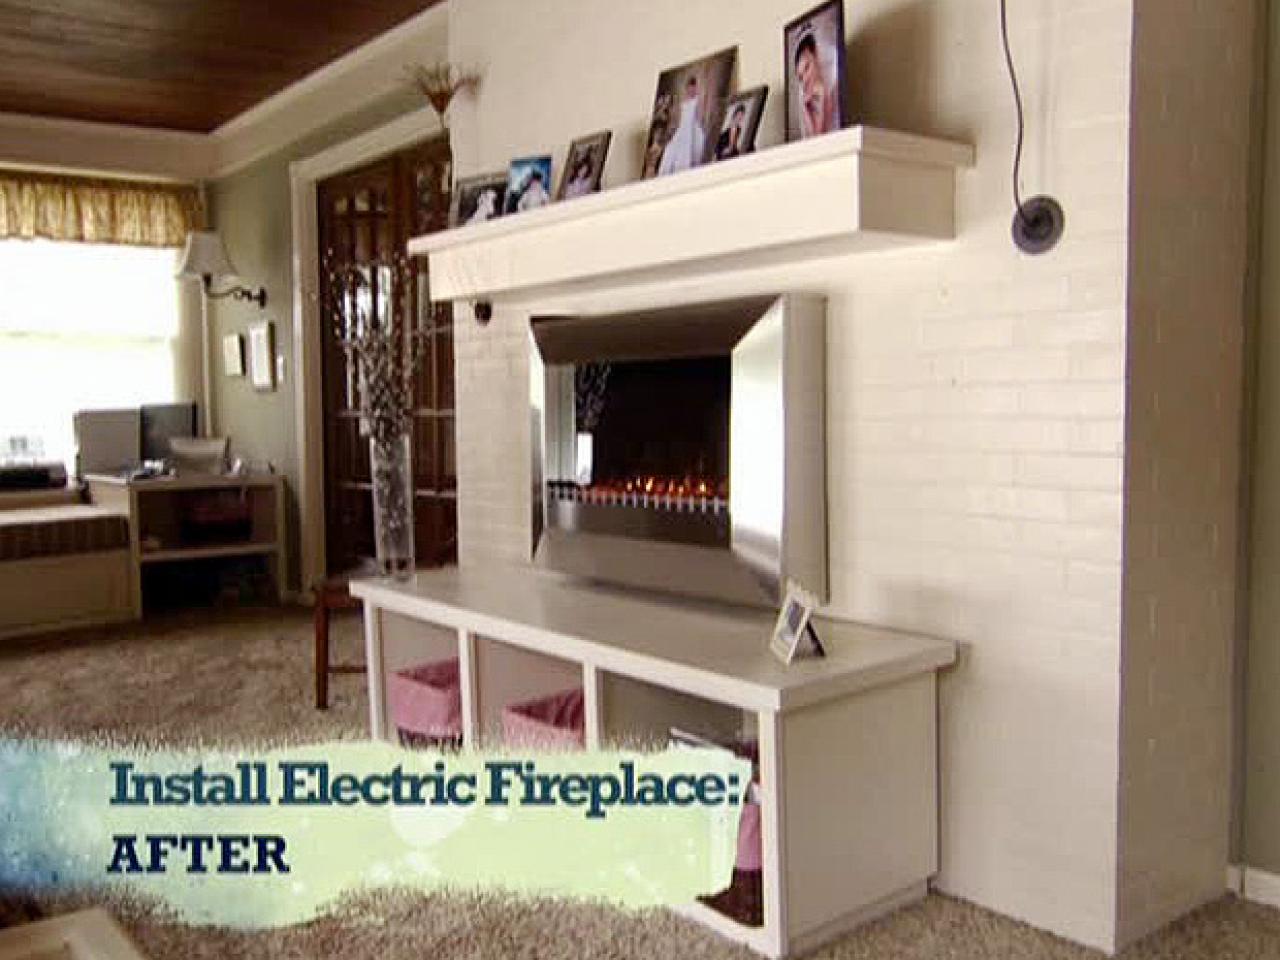 Install An Electric Fireplace With, Electric Fireplace With Hearth And Mantel